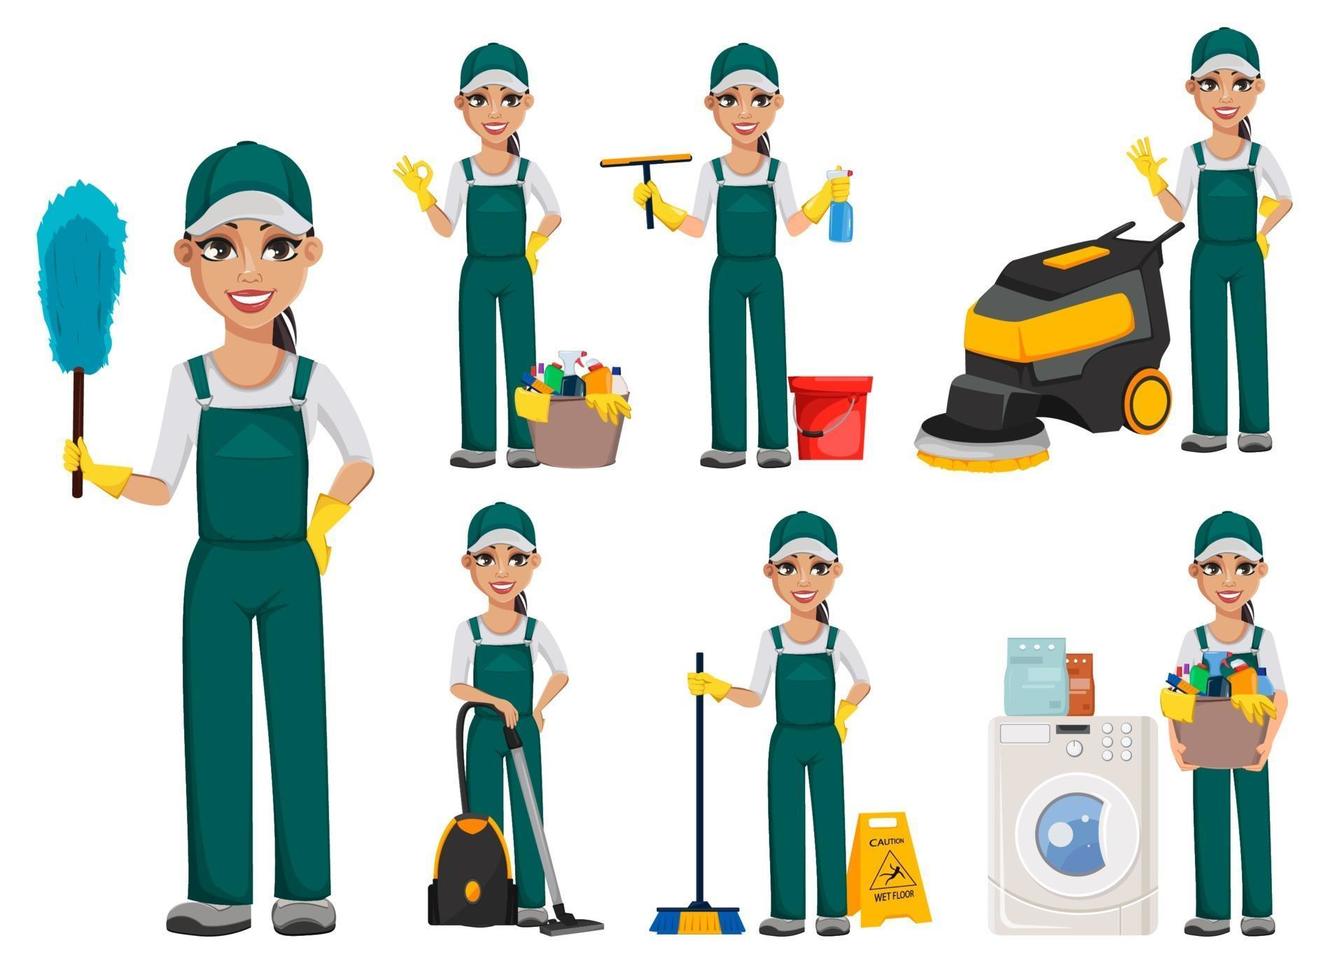 Cleaning service concept. Cheerful cartoon character vector